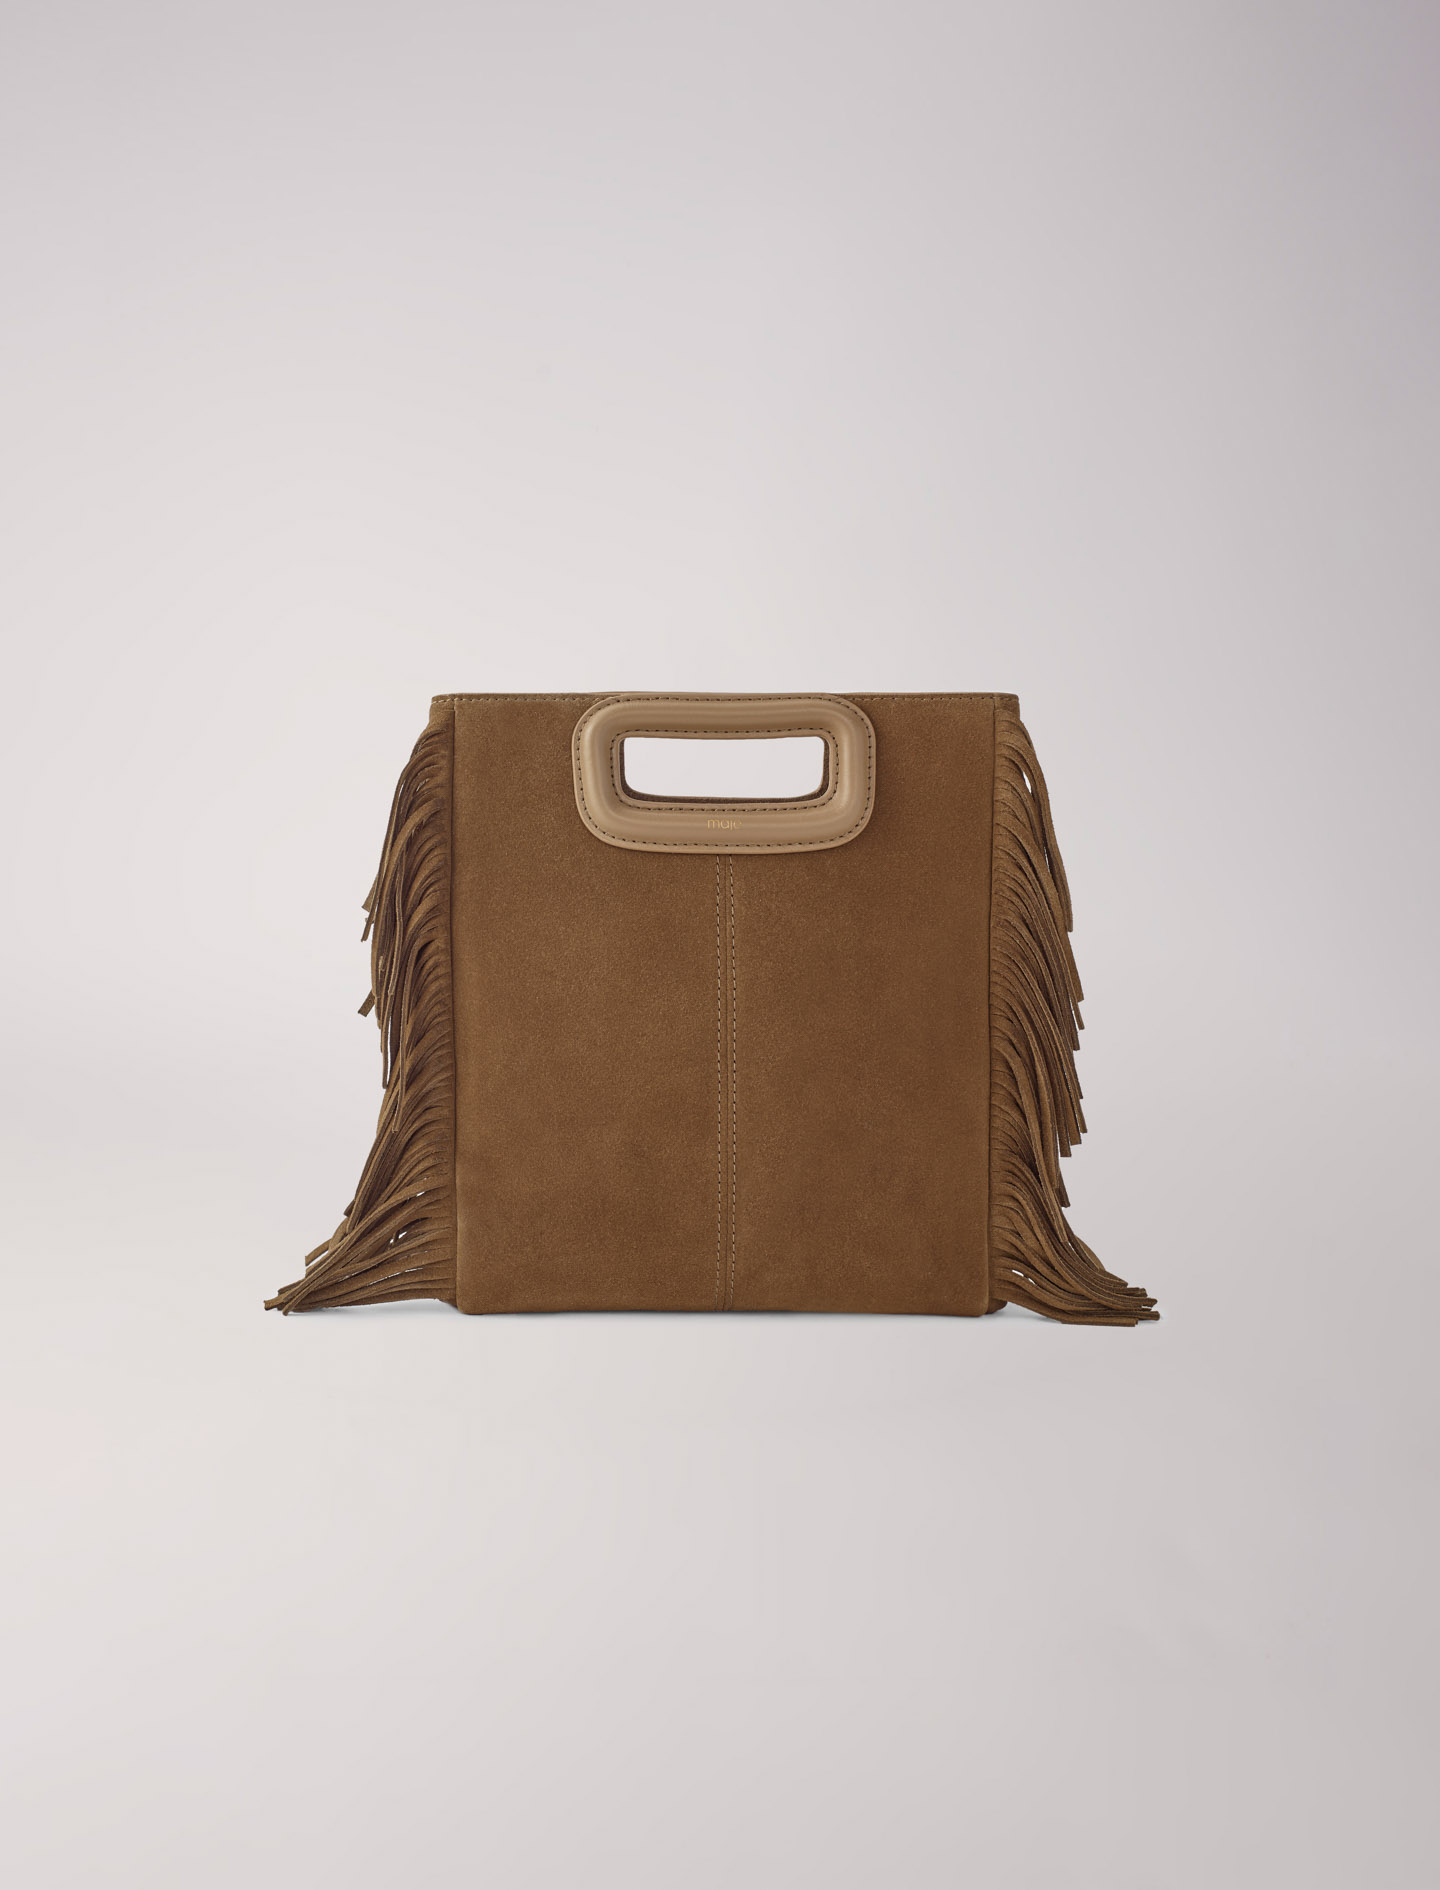 Woman's polyester Leather: Fringed M bag in suede for Spring/Summer, size Woman-All Bags-OS (ONE SIZE), in color Camel / Brown